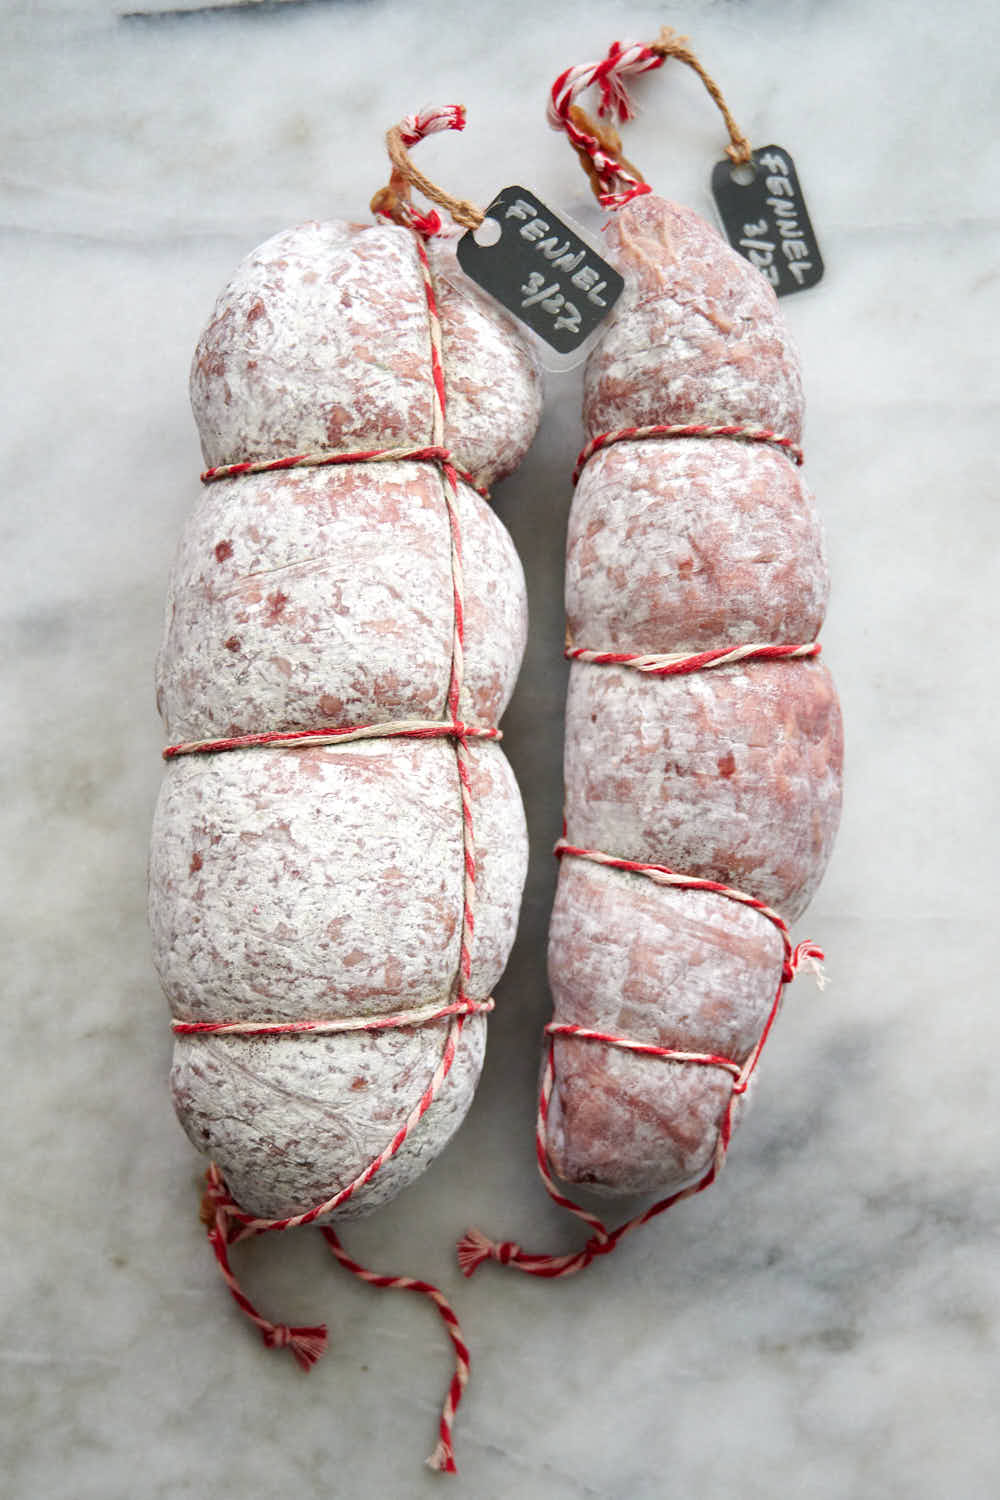 two fennel salami on a table covered in white mold.